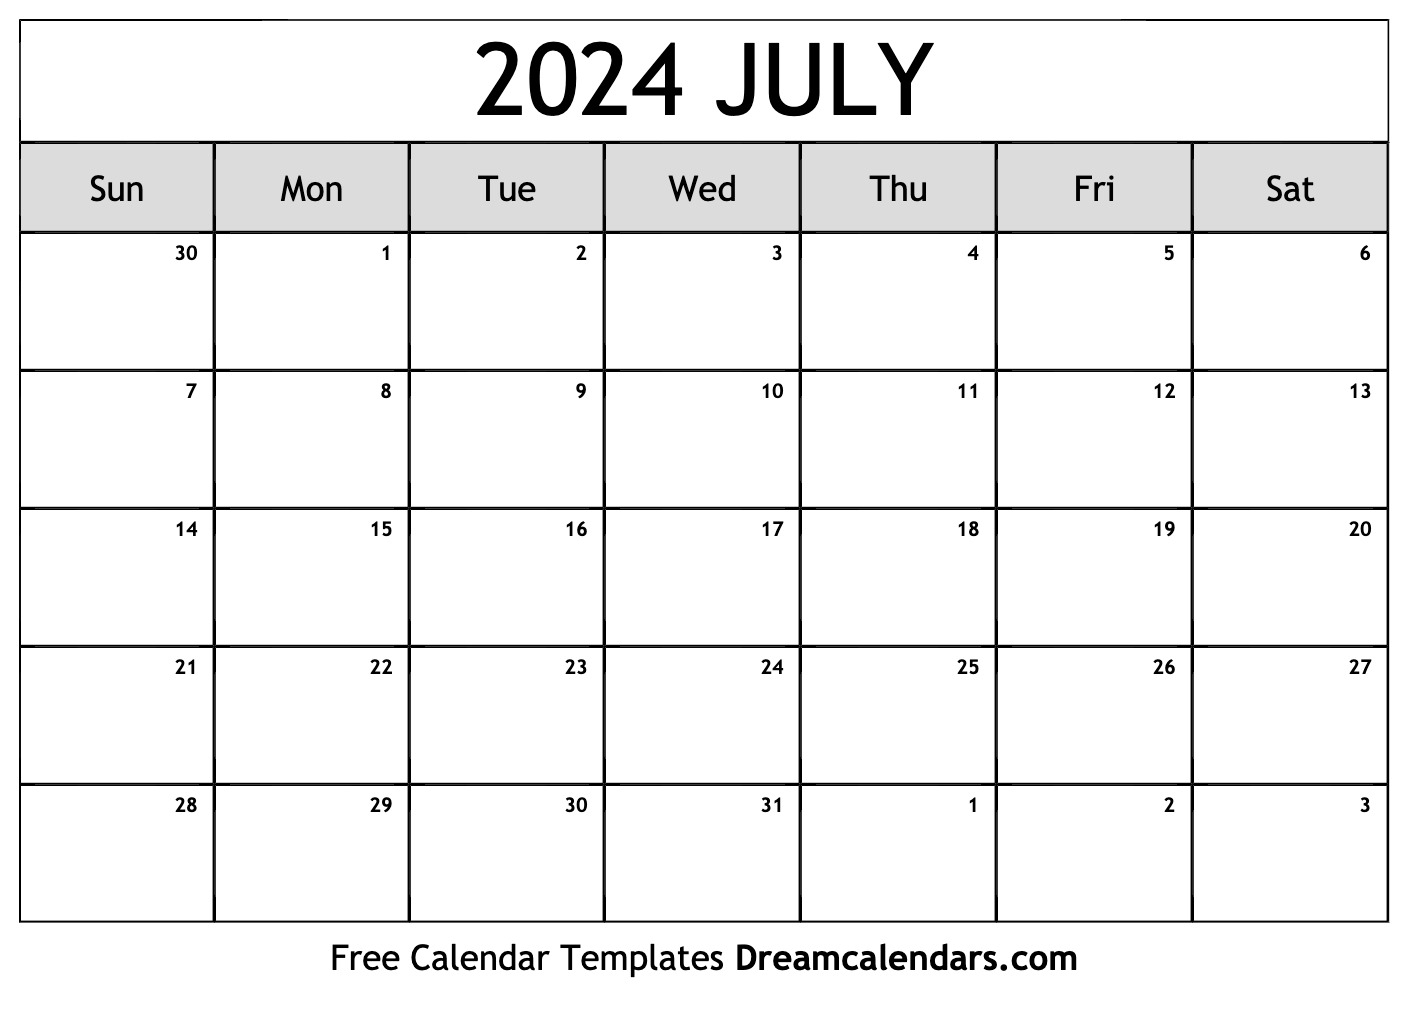 July 2024 Calendar | Free Blank Printable With Holidays for Blank Calendar July 2024 Free Printable